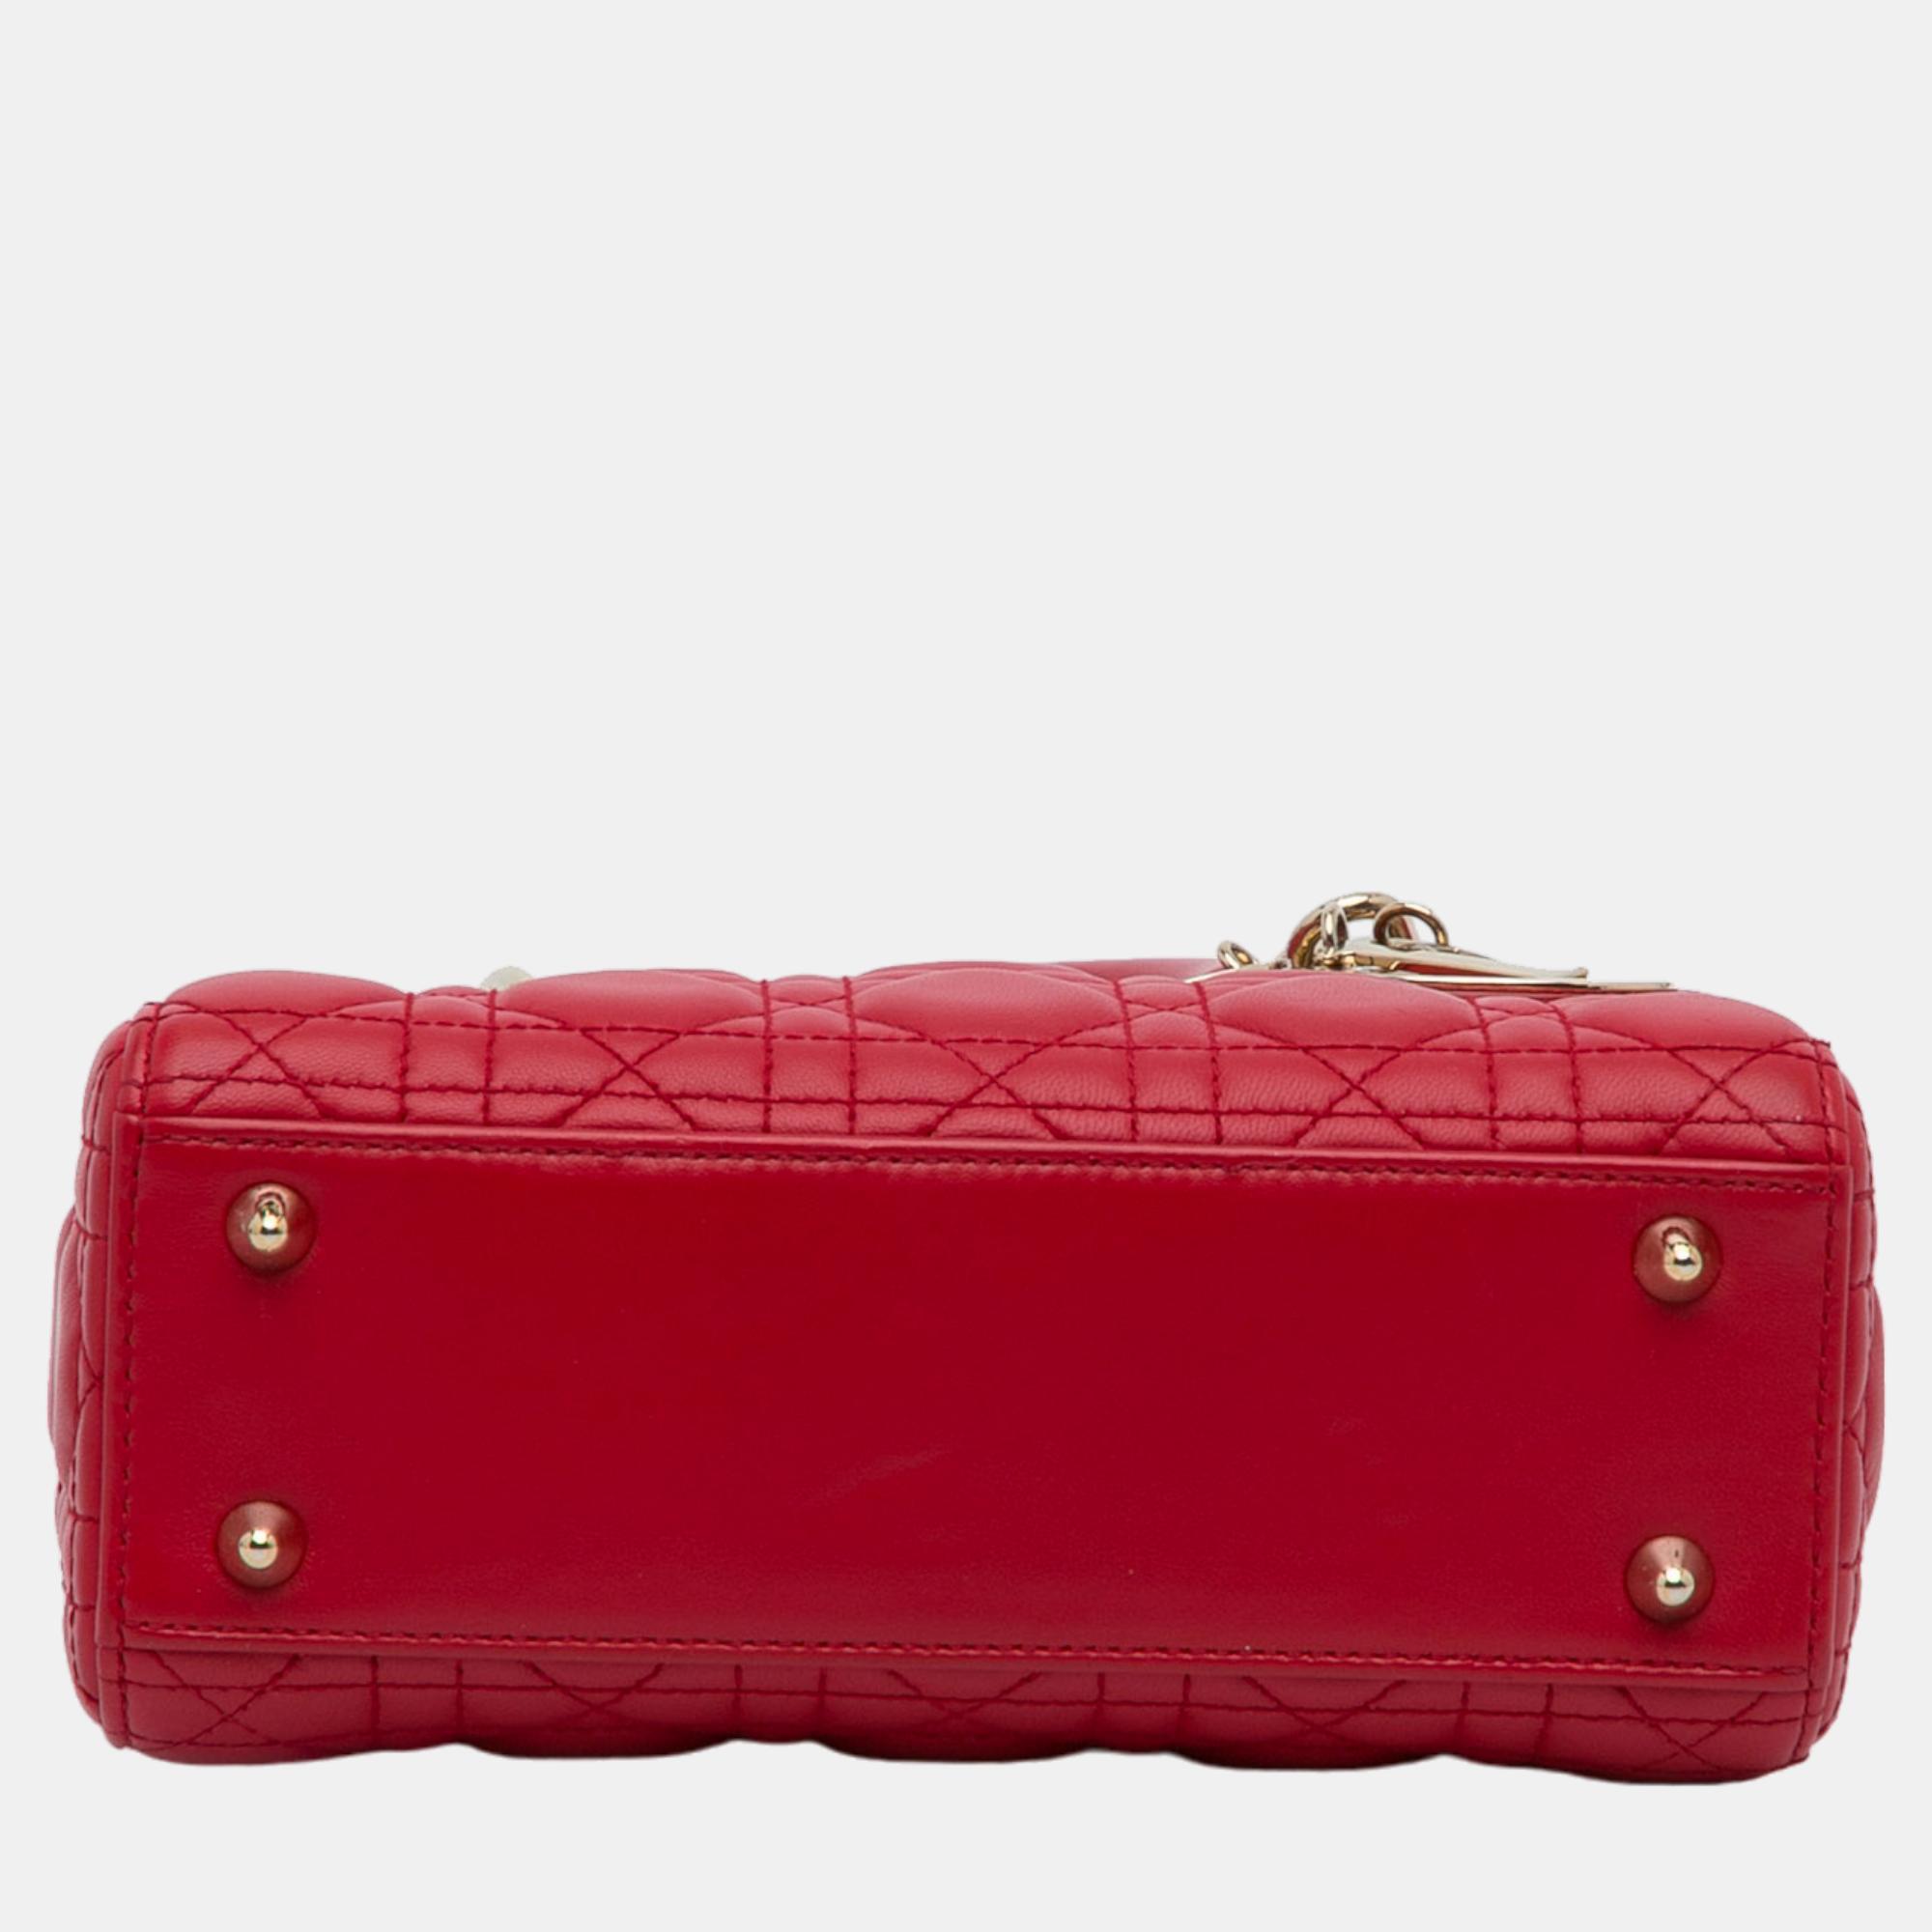 Dior Red Small Lambskin Cannage Lady Dior